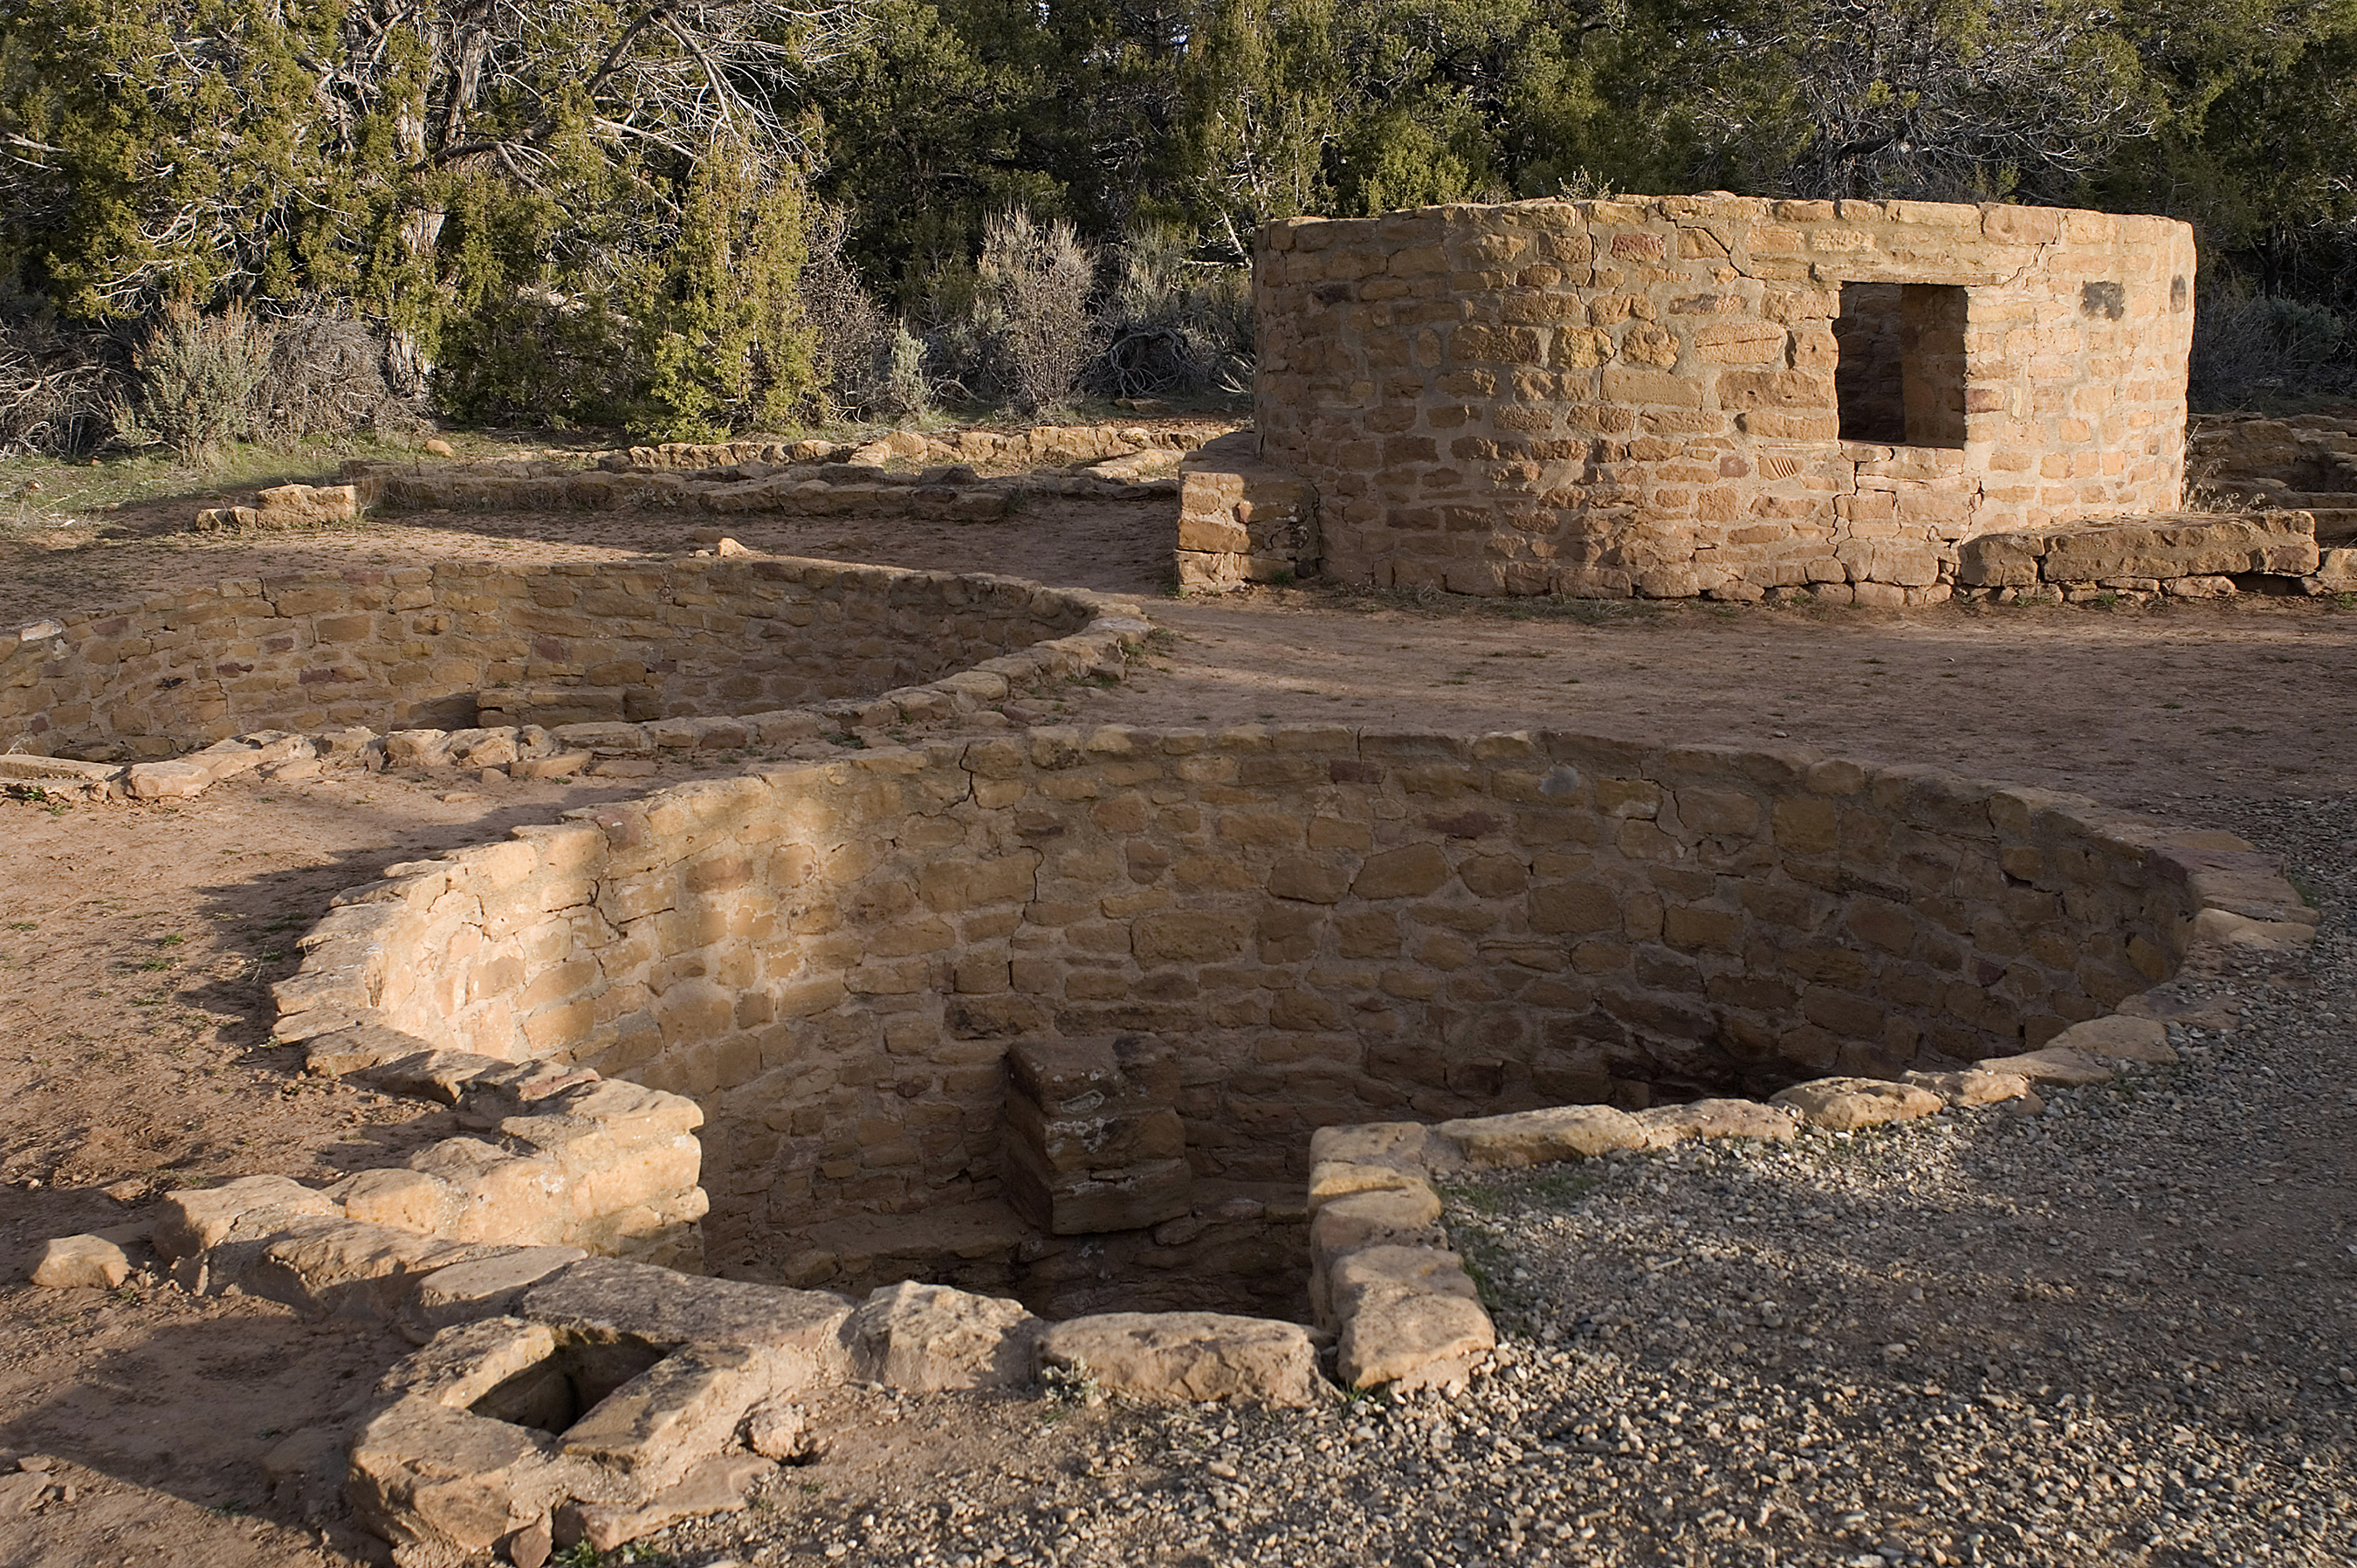 Two round and key-shaped depressions that are lined with stone-masonry walls. Just behind these is a round, one-story, stone-masonry structure.